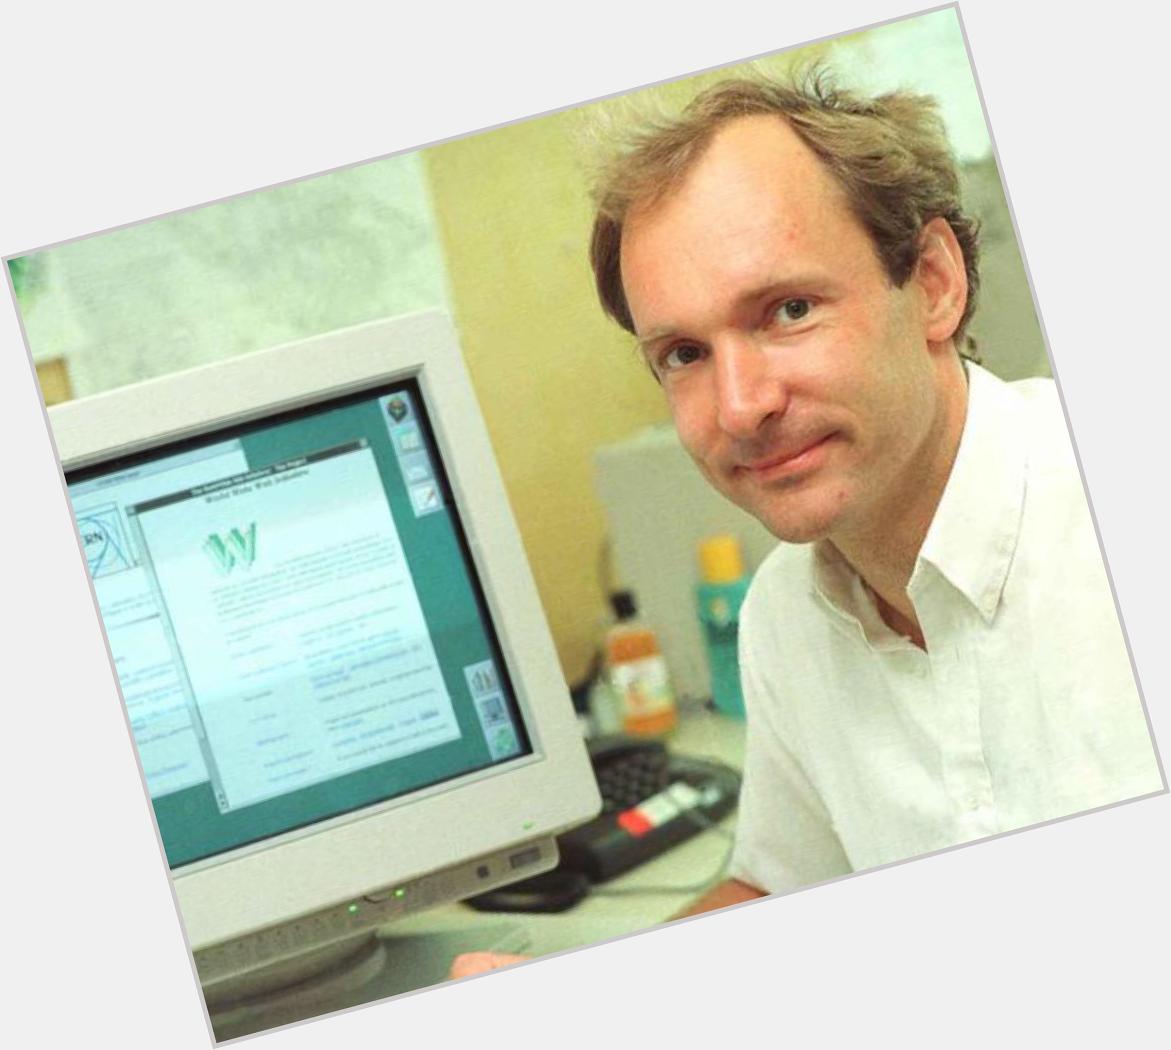 Happy birthday to Tim Berners-Lee, the inventor of the World Wide Web, who turns 60 today.   